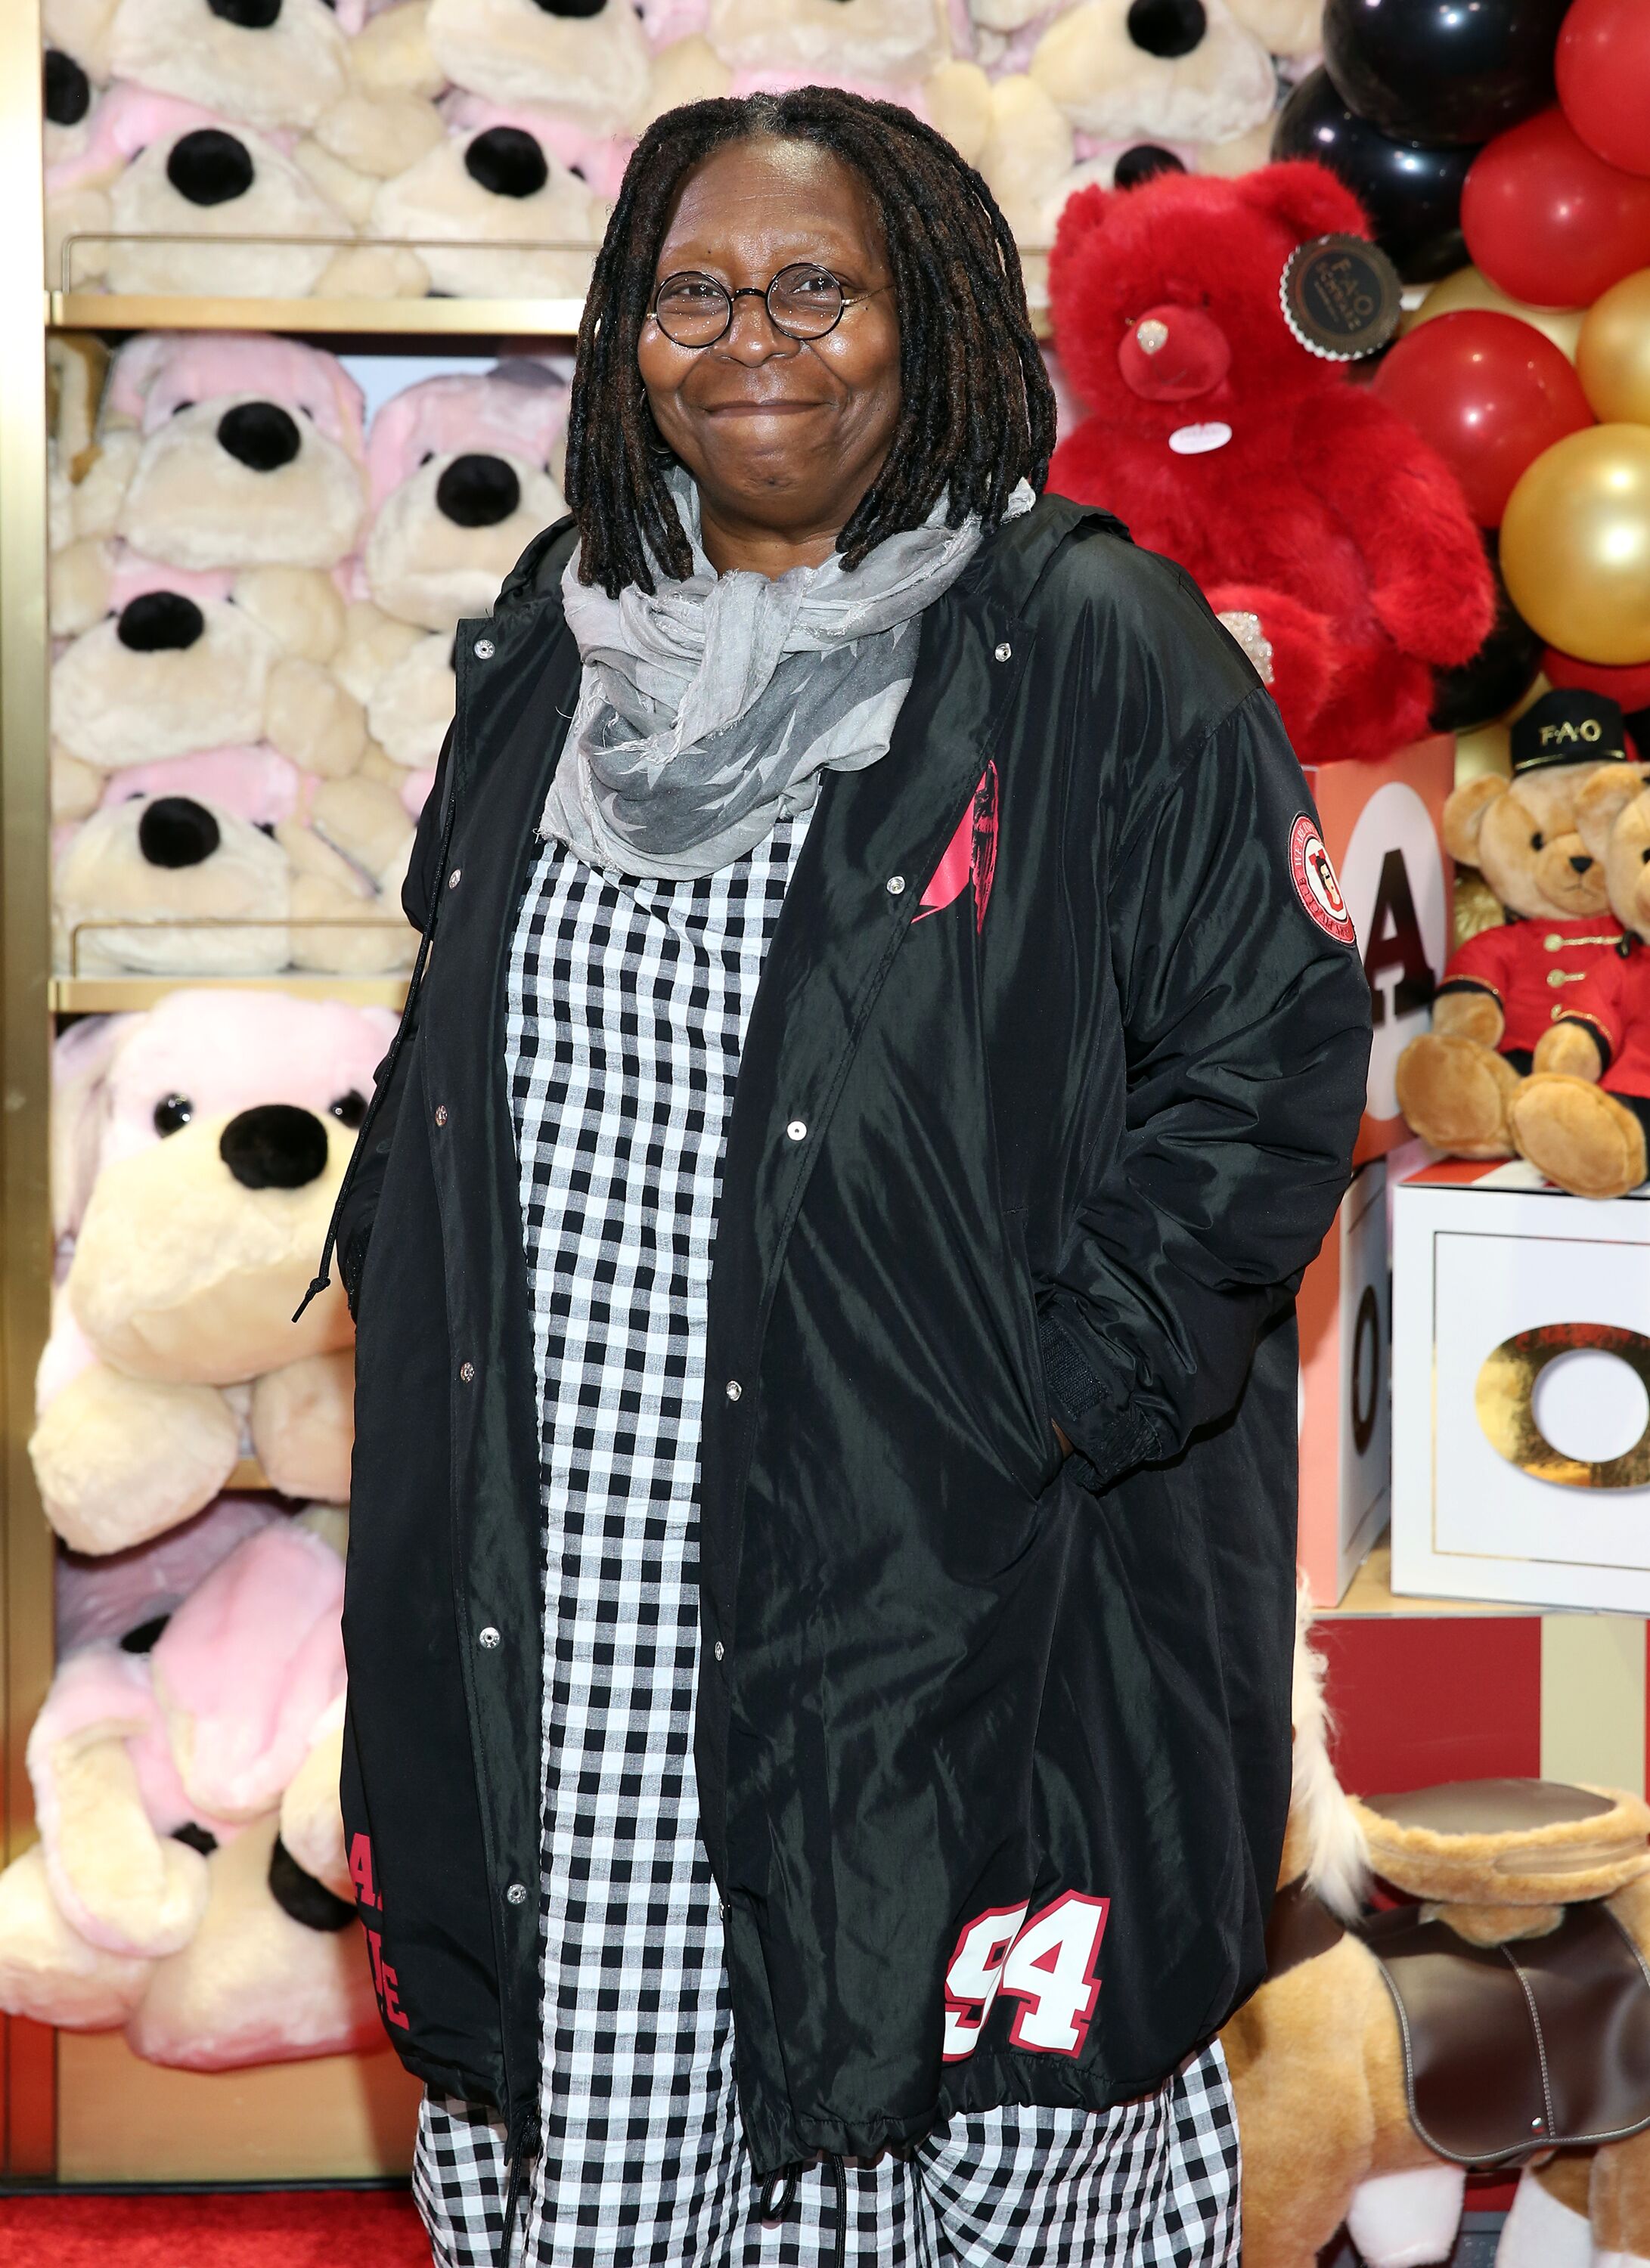 Whoopi Goldberg at the FAO Schwarz Grand Opening Event at Rockefeller Plaza on November 15, 2018, in New York City | Photo: Monica Schipper/Getty Images